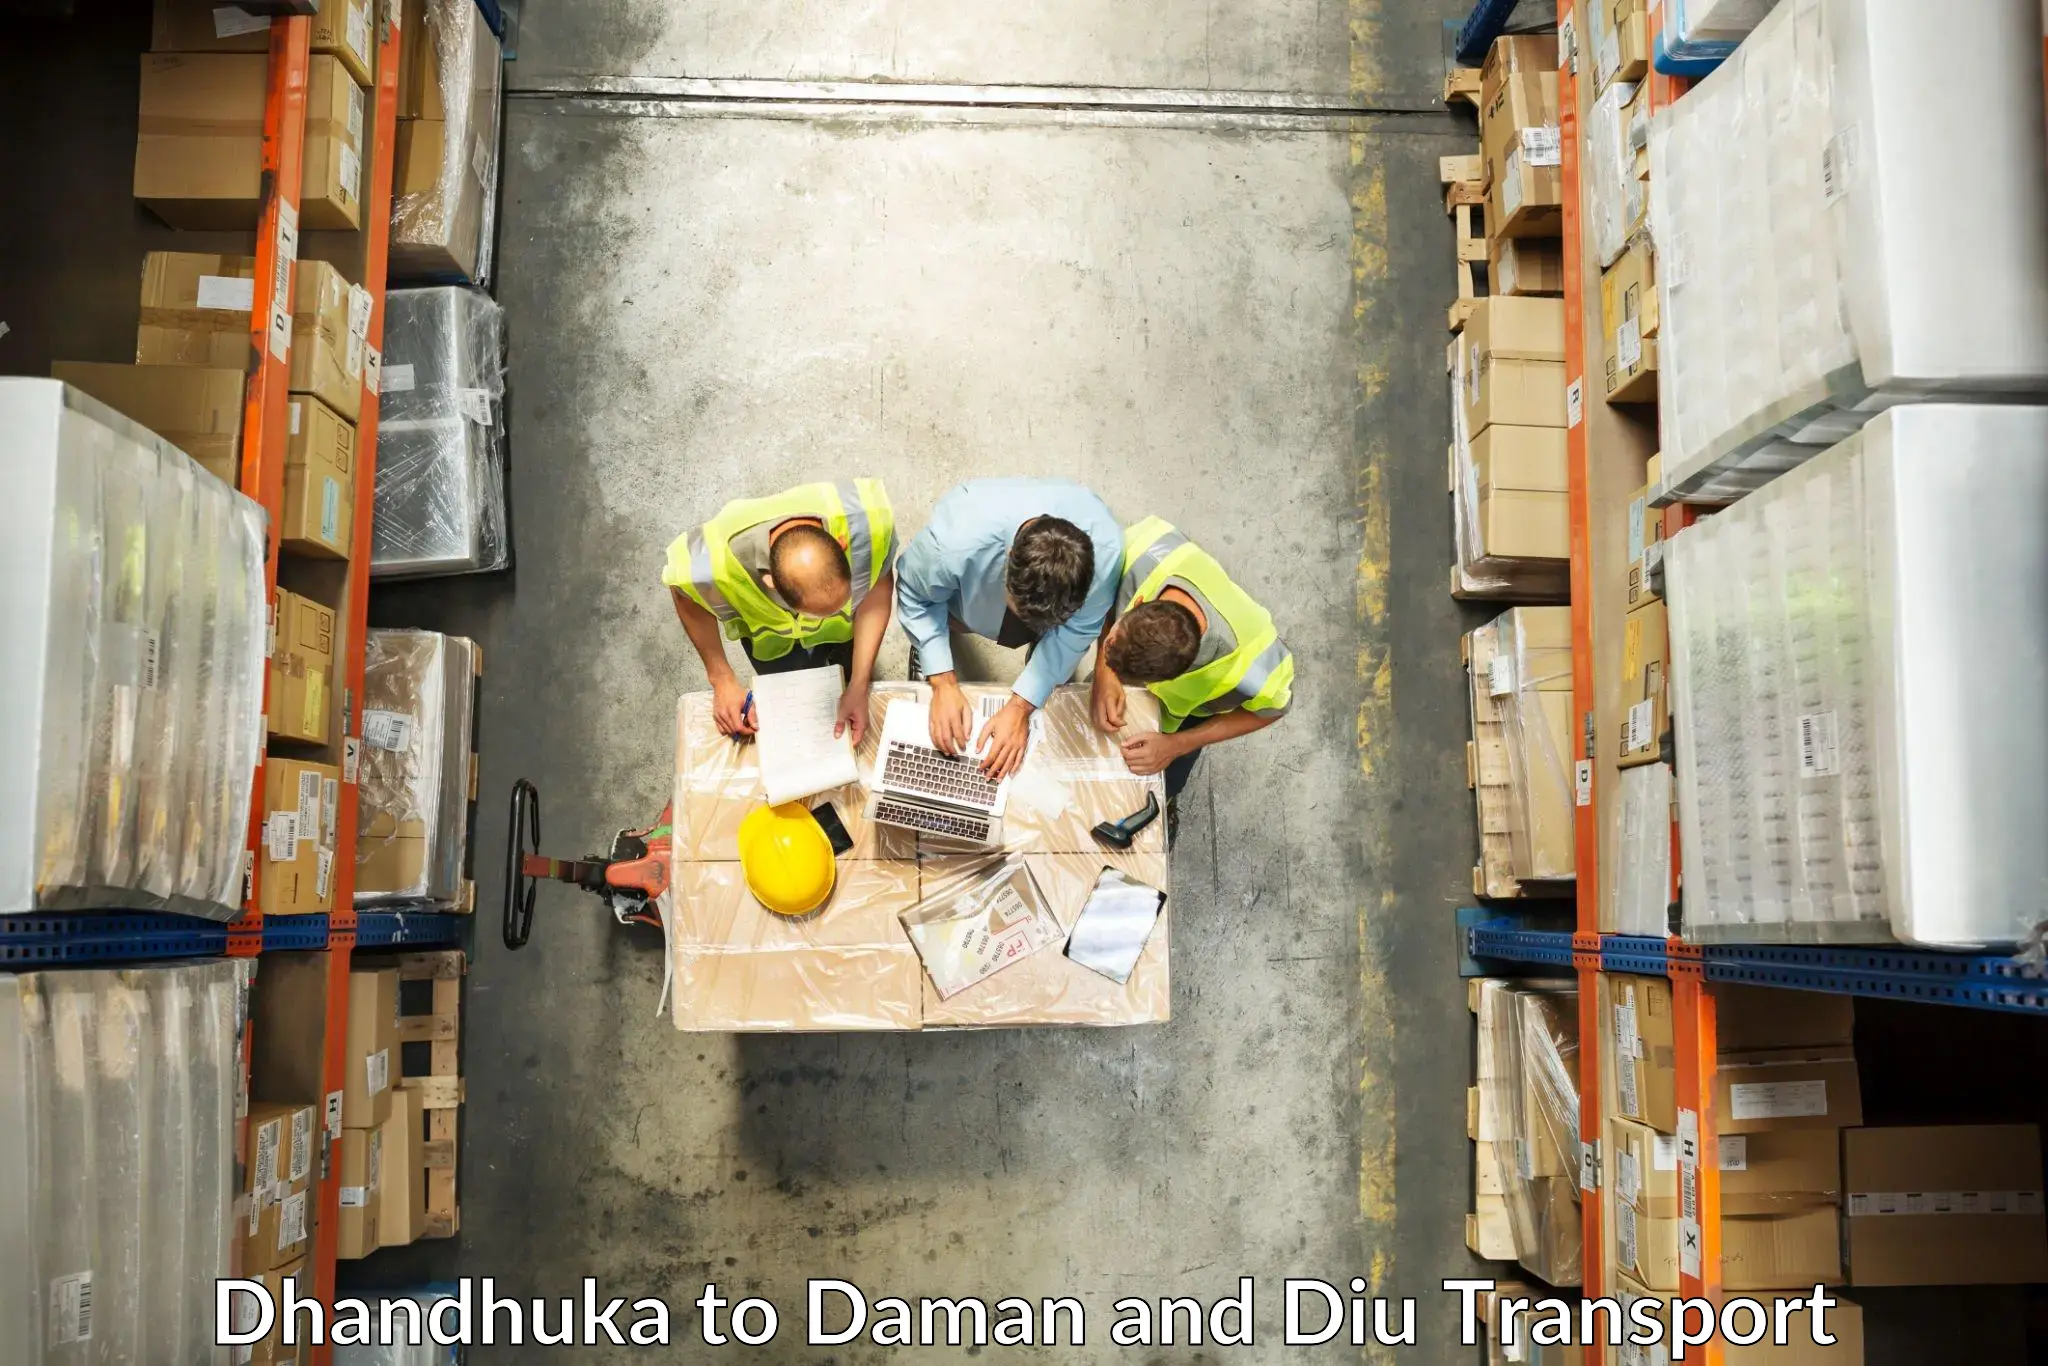 Container transport service in Dhandhuka to Daman and Diu